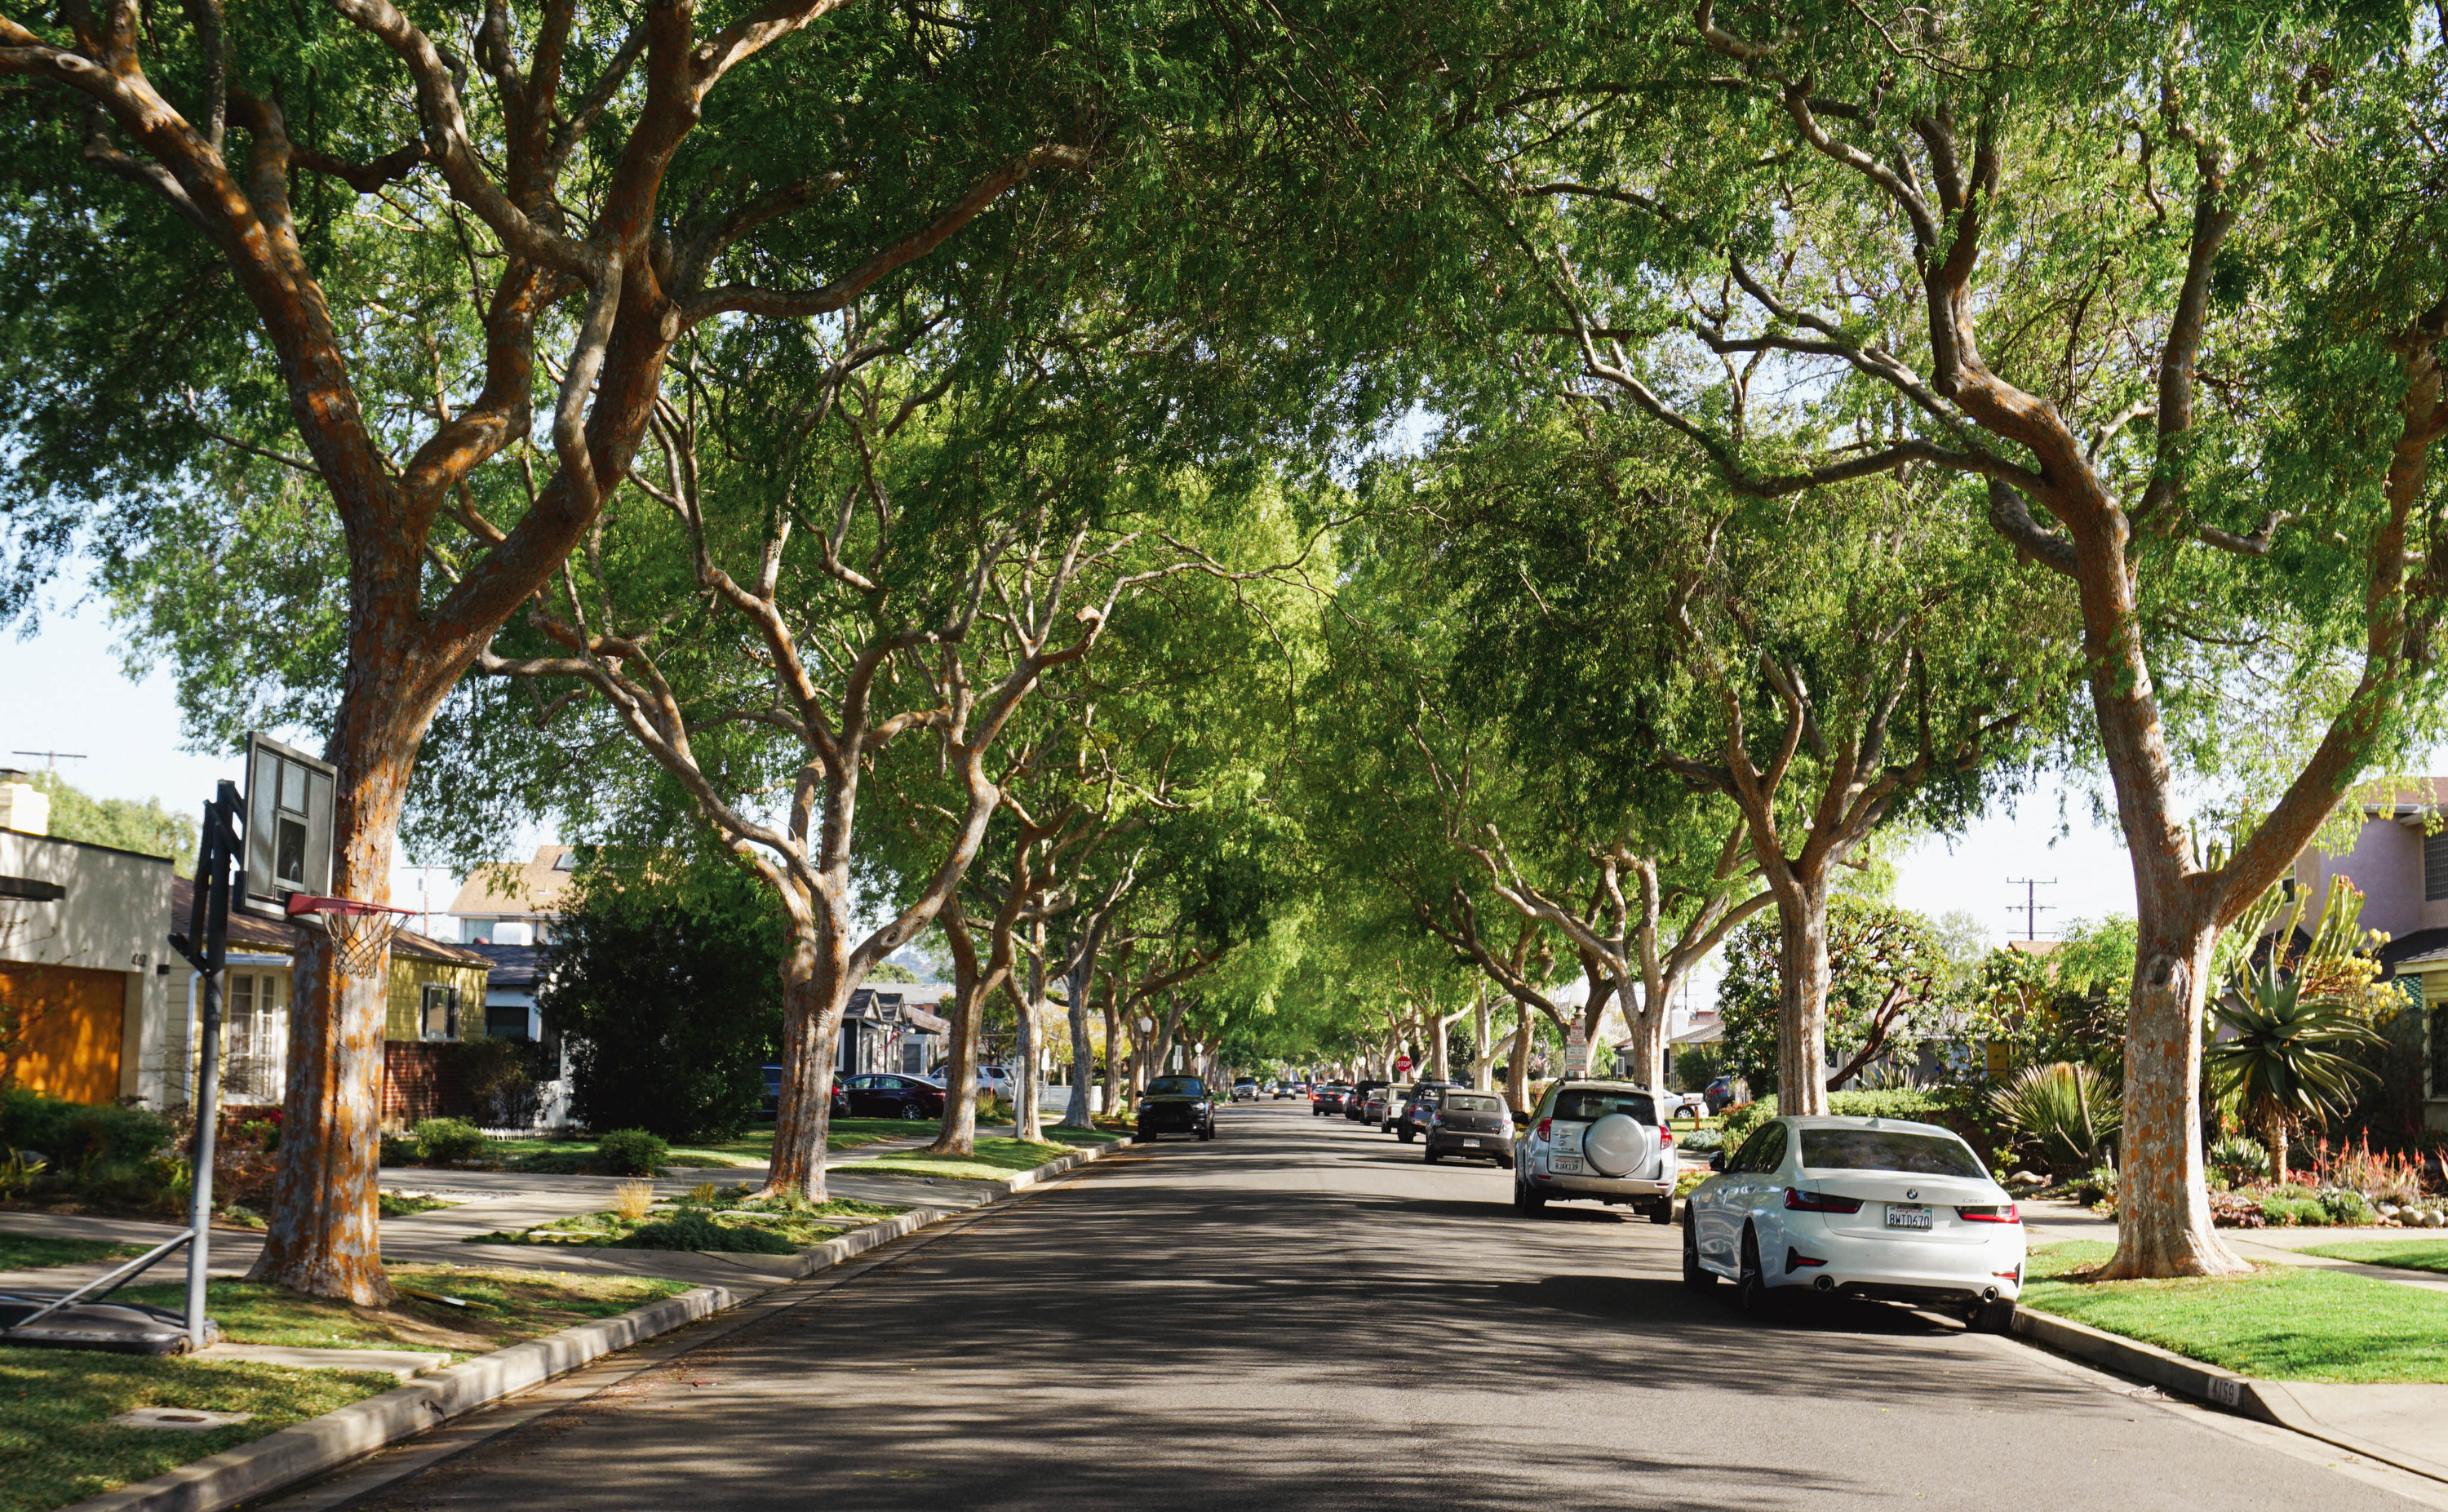 Chinese elm trees along a residential street